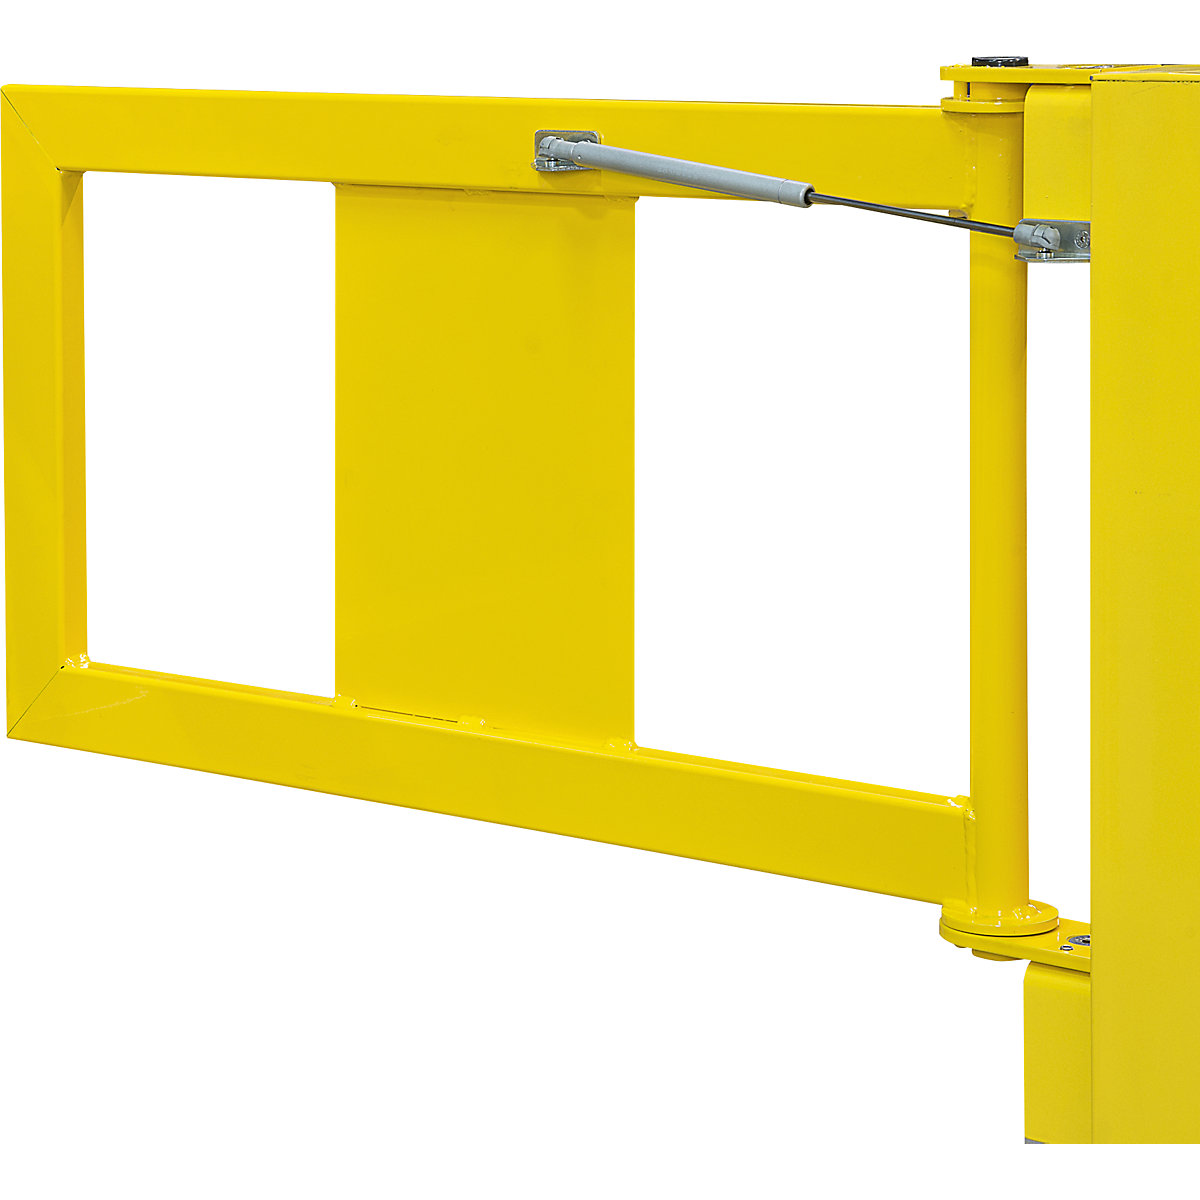 S-Line door for safety railing